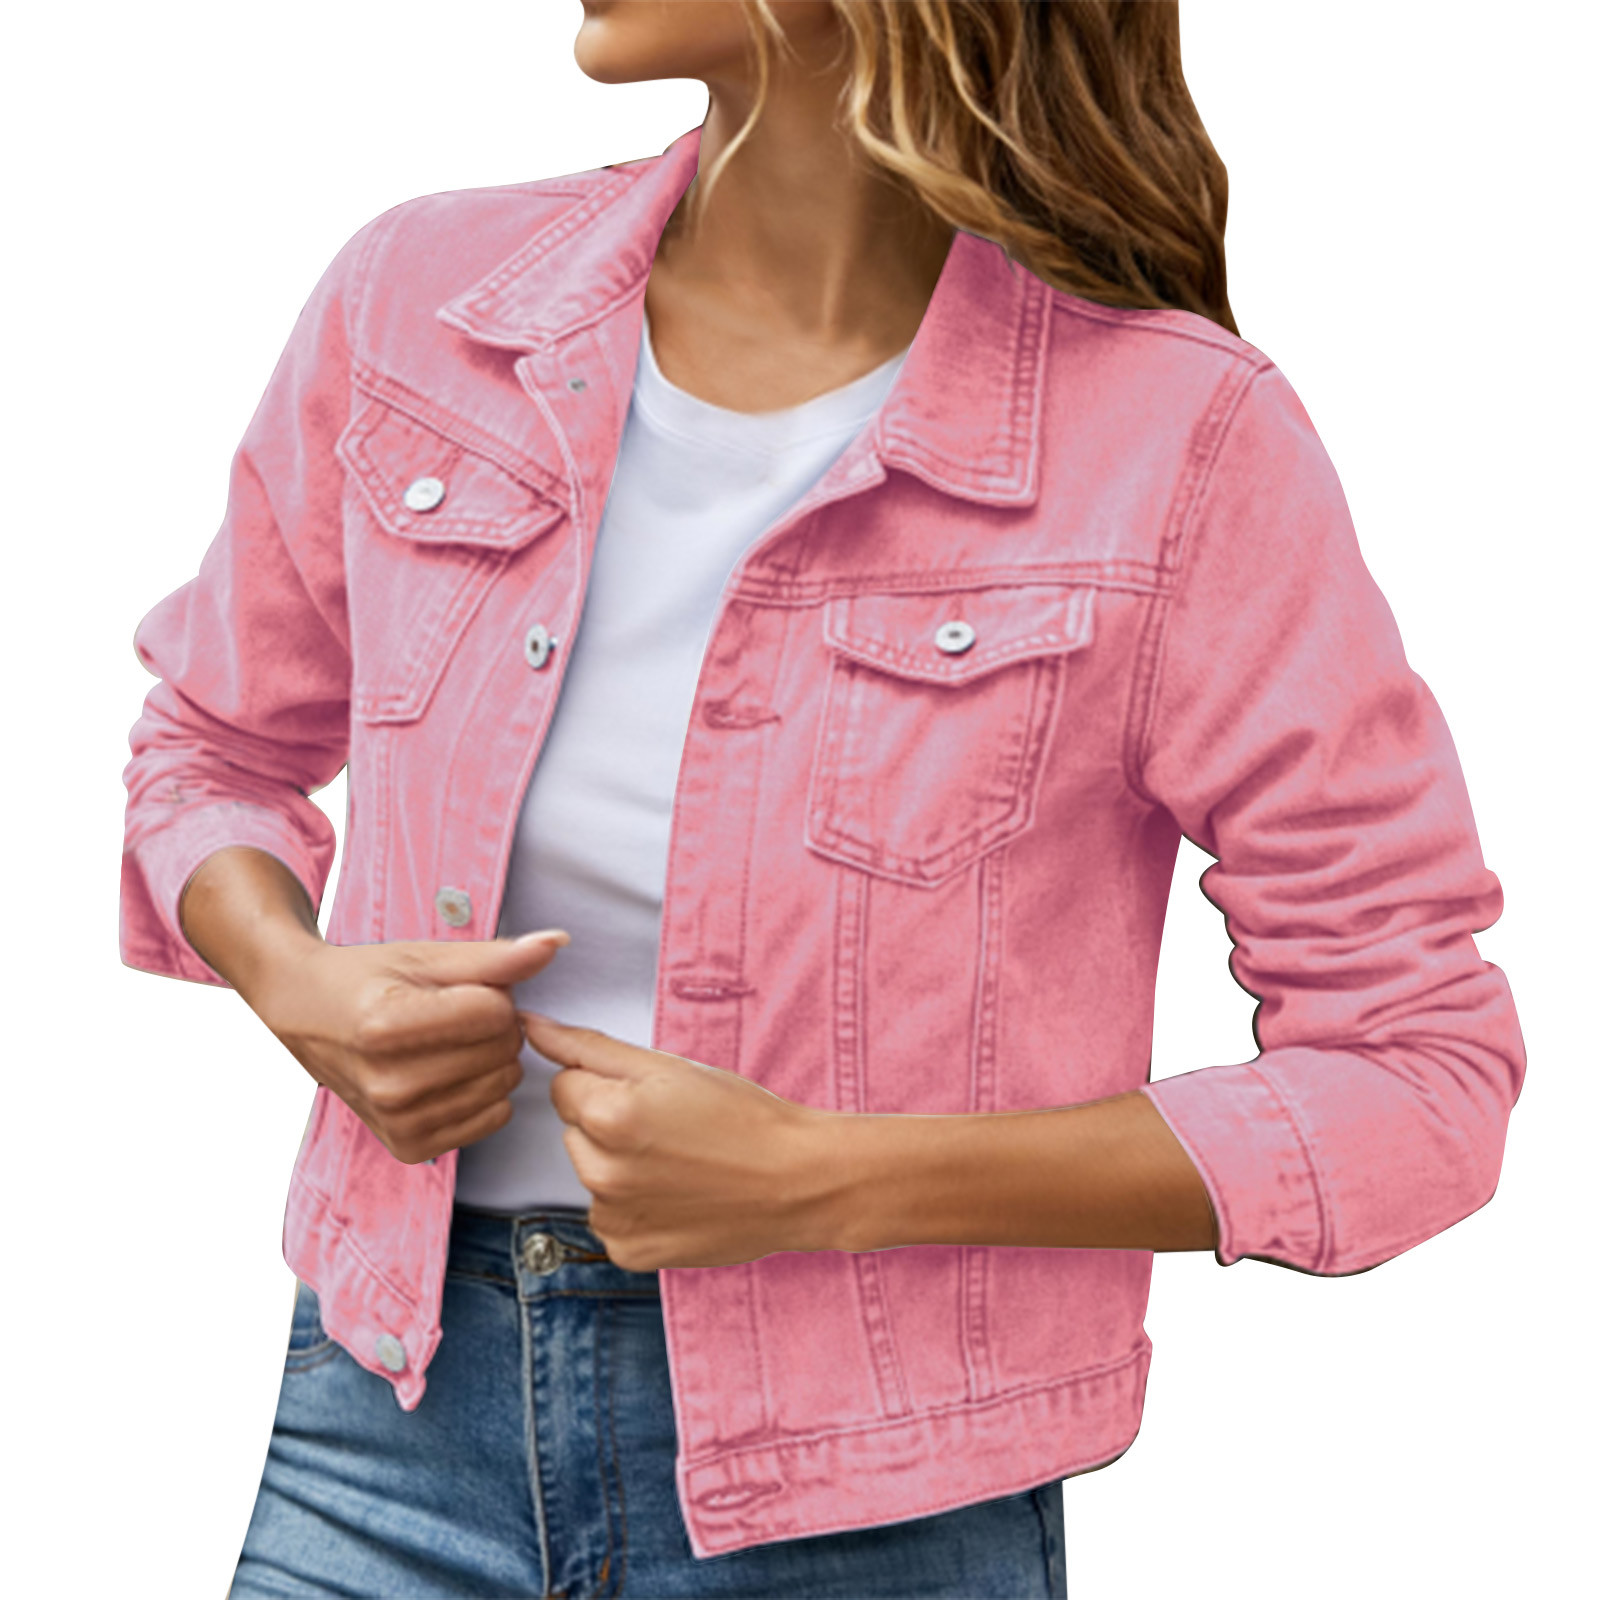 iOPQO womens sweaters Women's Basic Solid Color Button Down Denim Cotton Jacket With Pockets Denim Jacket Coat Women's Denim Jackets Pink S - image 3 of 9